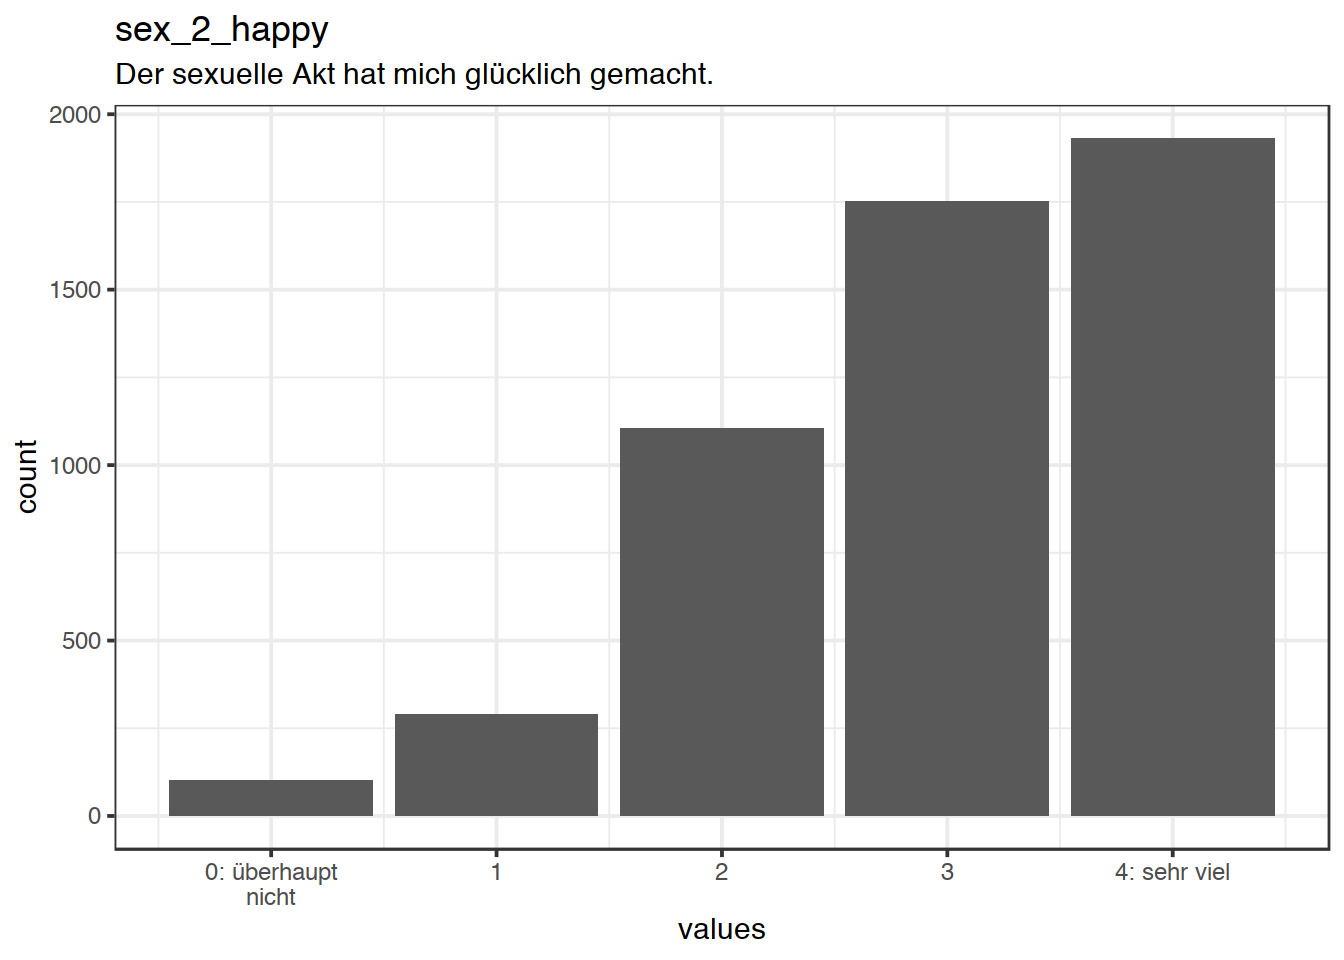 Distribution of values for sex_2_happy